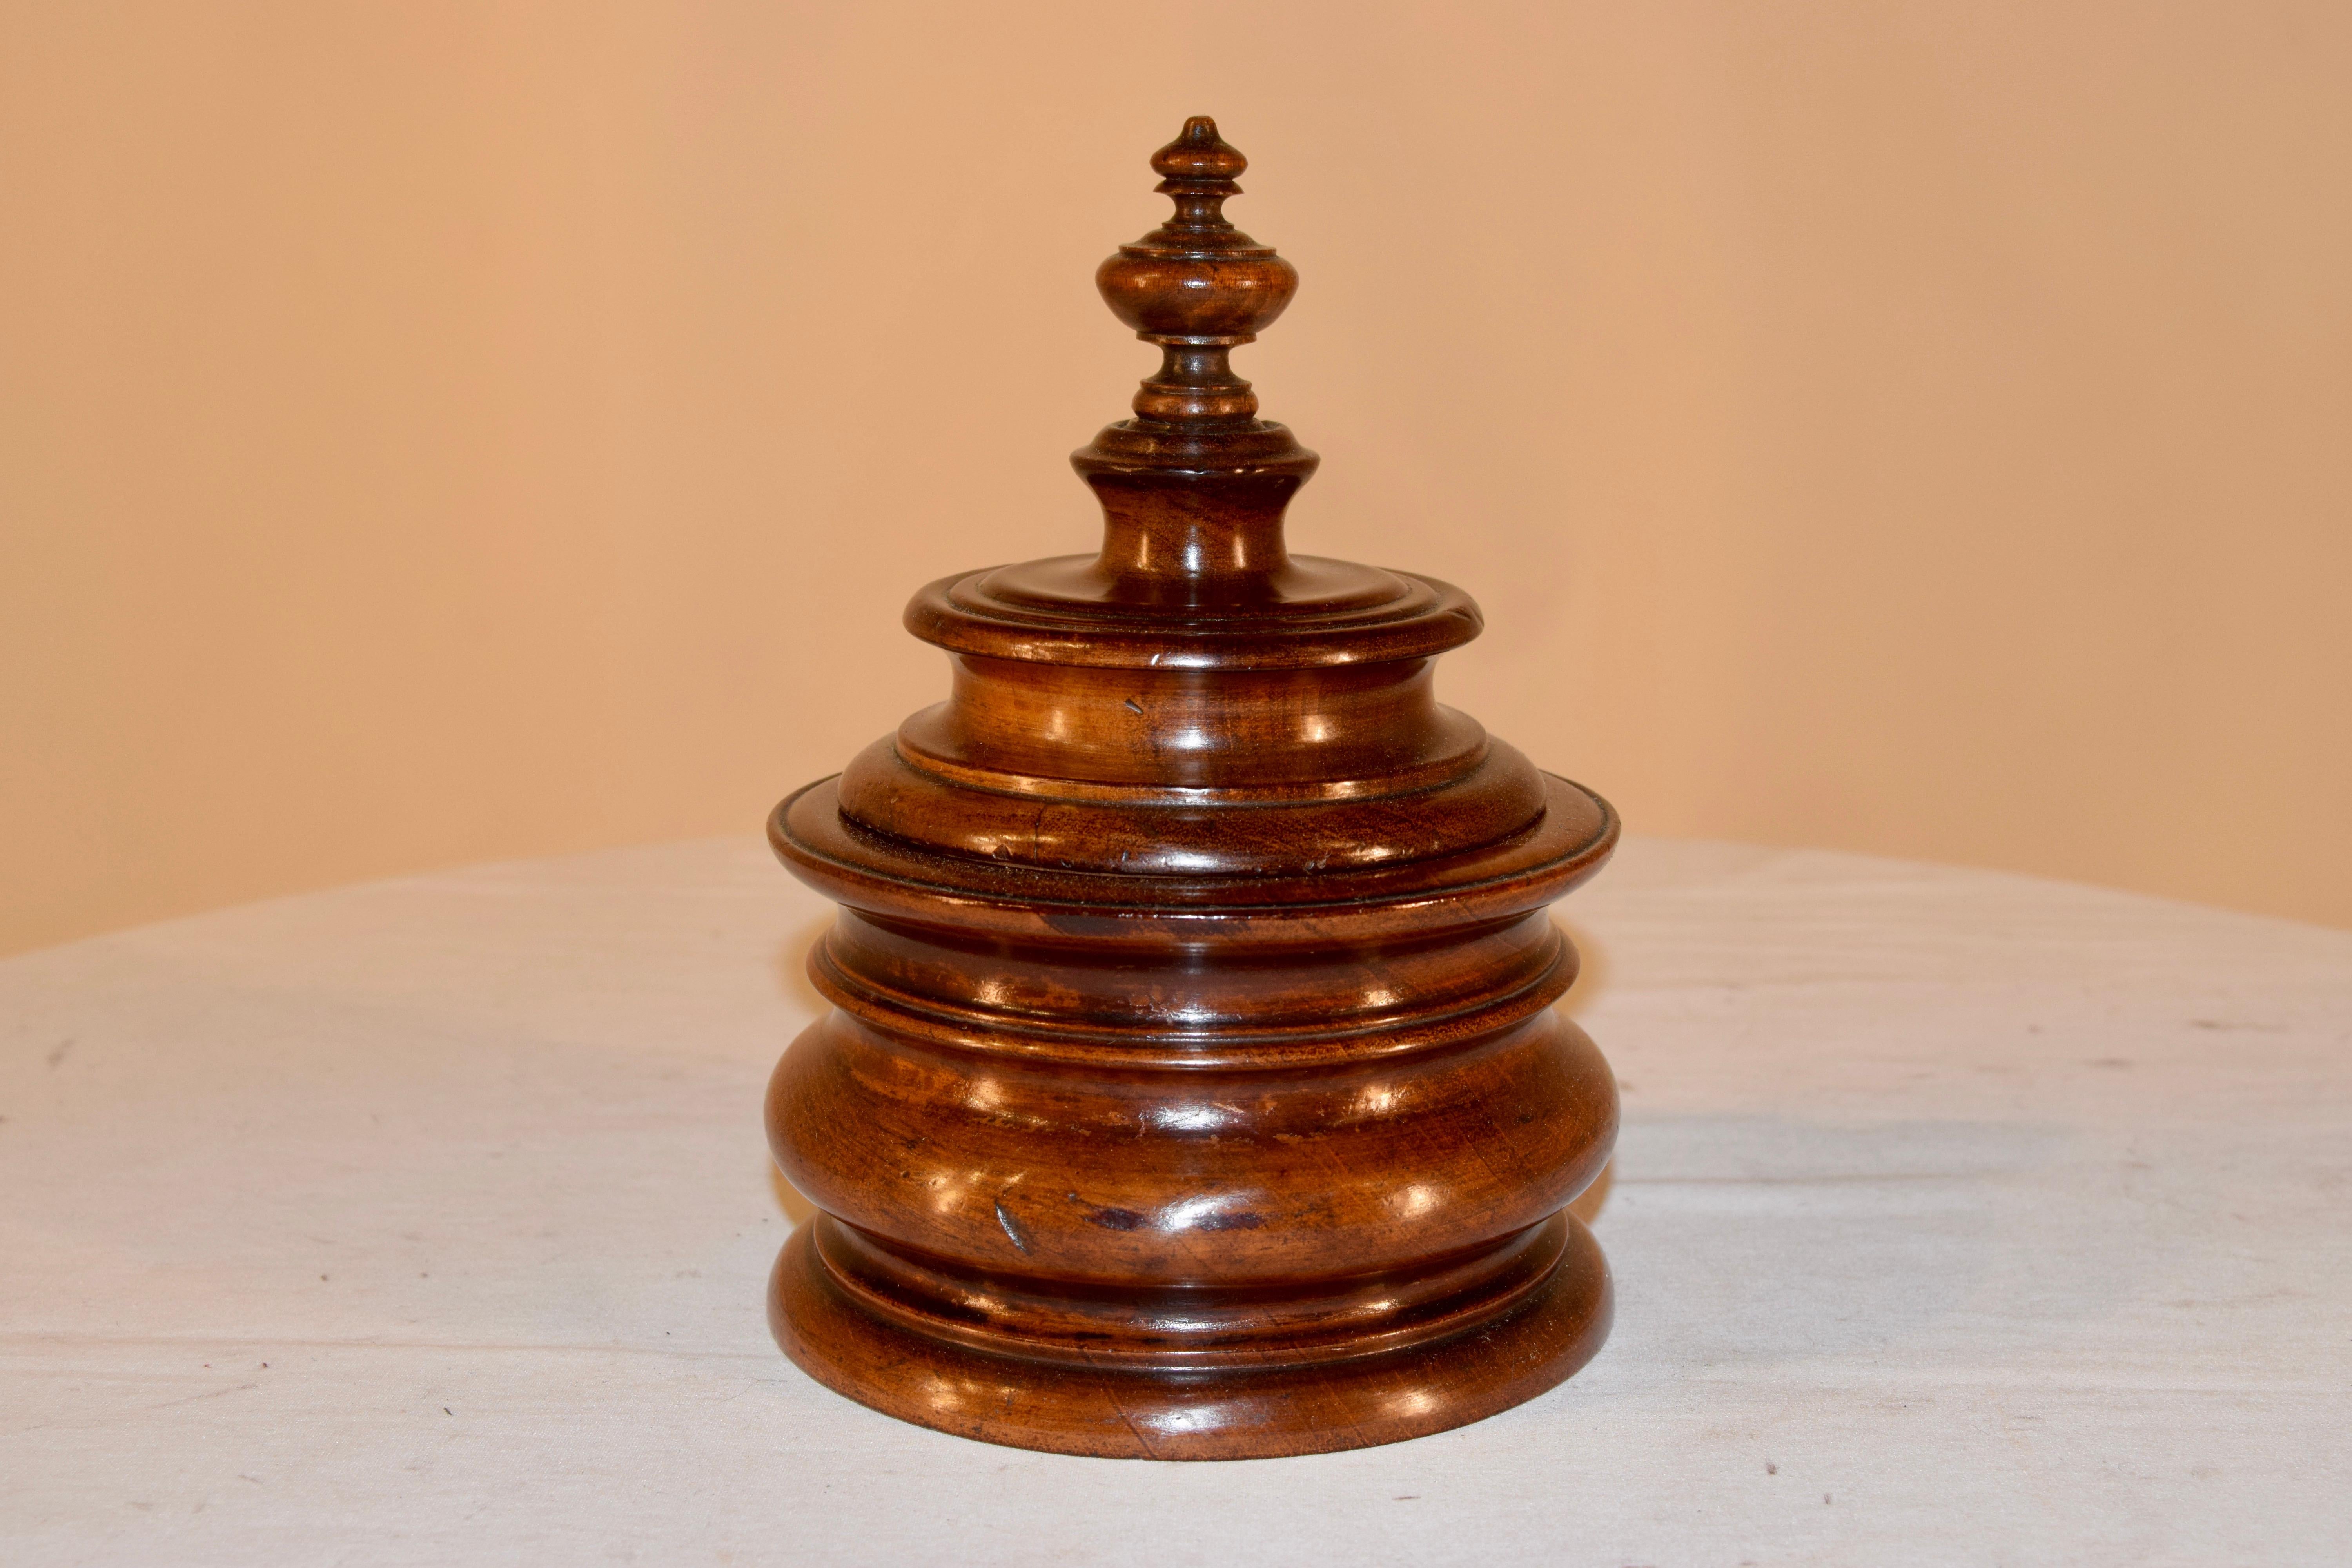 19th century lidded turned treen jar with a lovely shape. The top is expertly turned and finished with a finial on the top and fits on the lovely hand turned base.